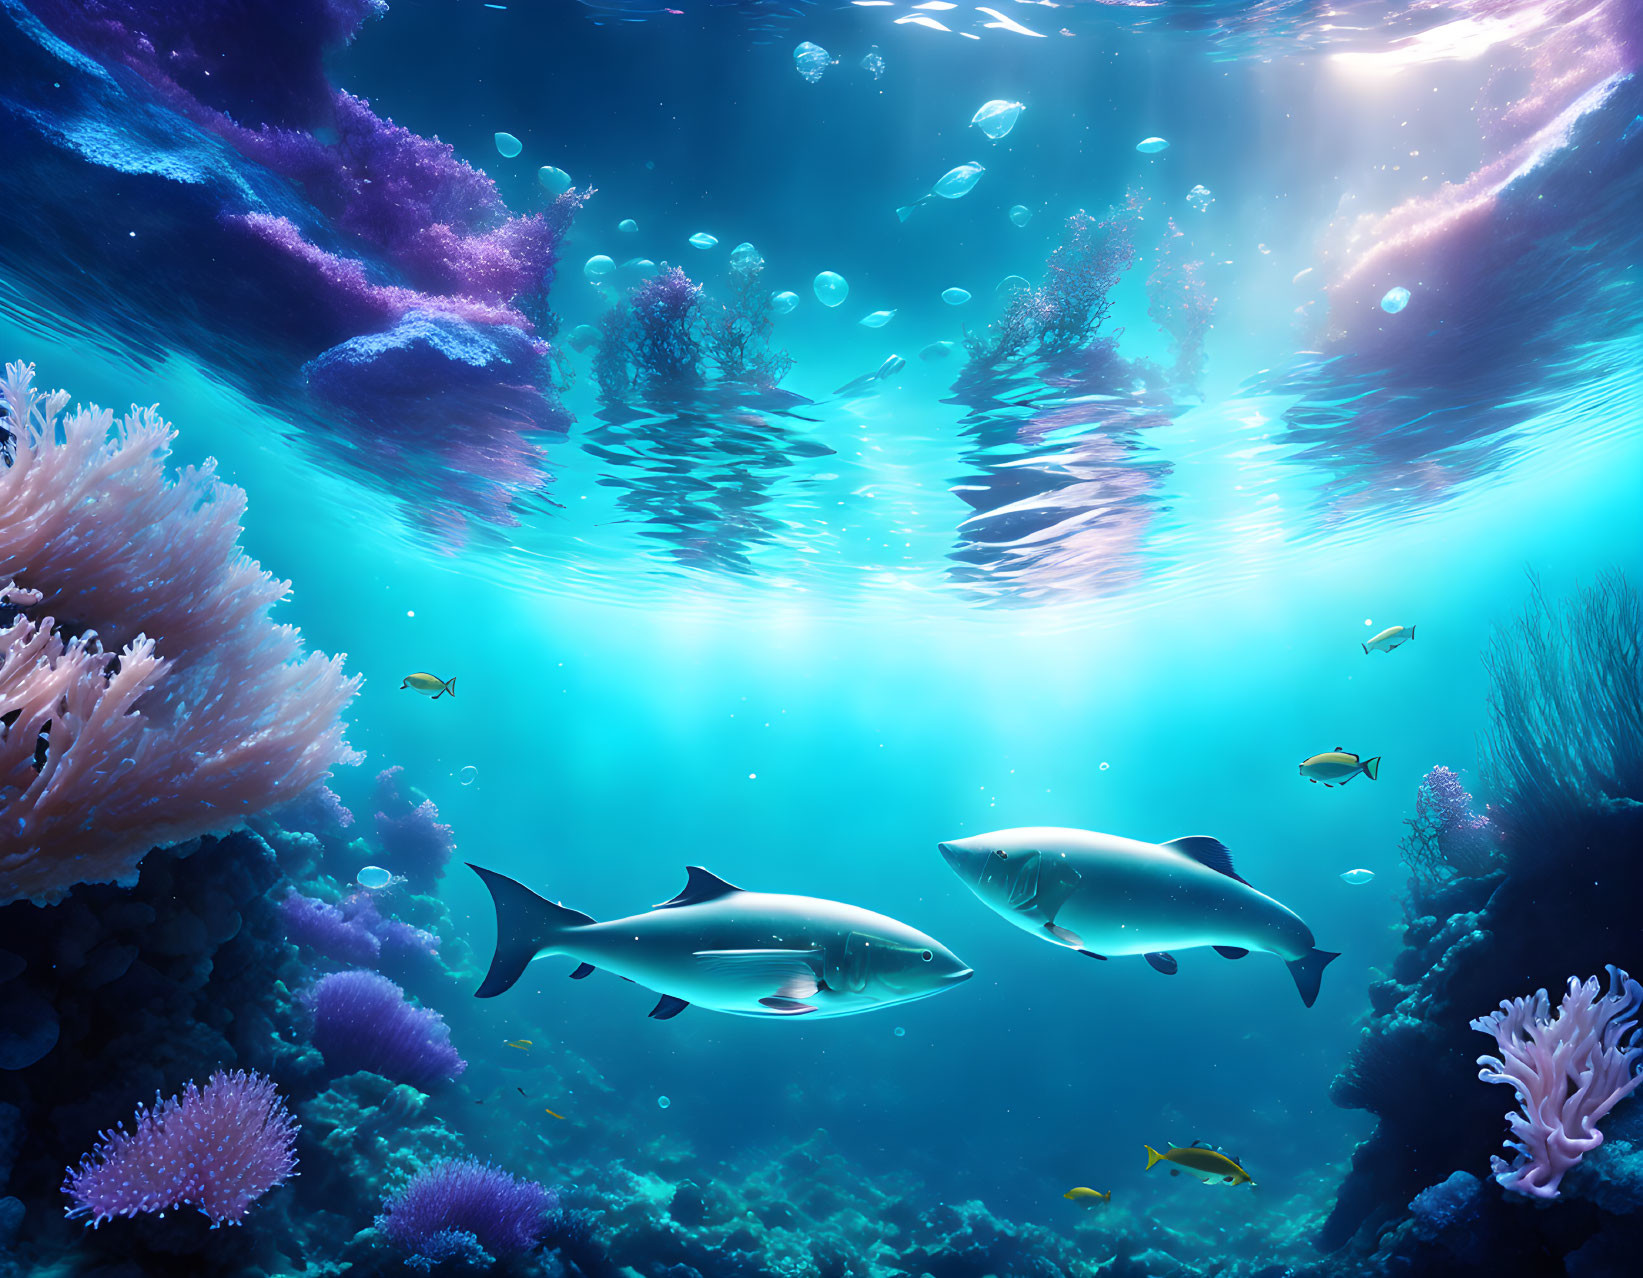 Colorful Coral Reefs and Fish in Sunlit Underwater Scene